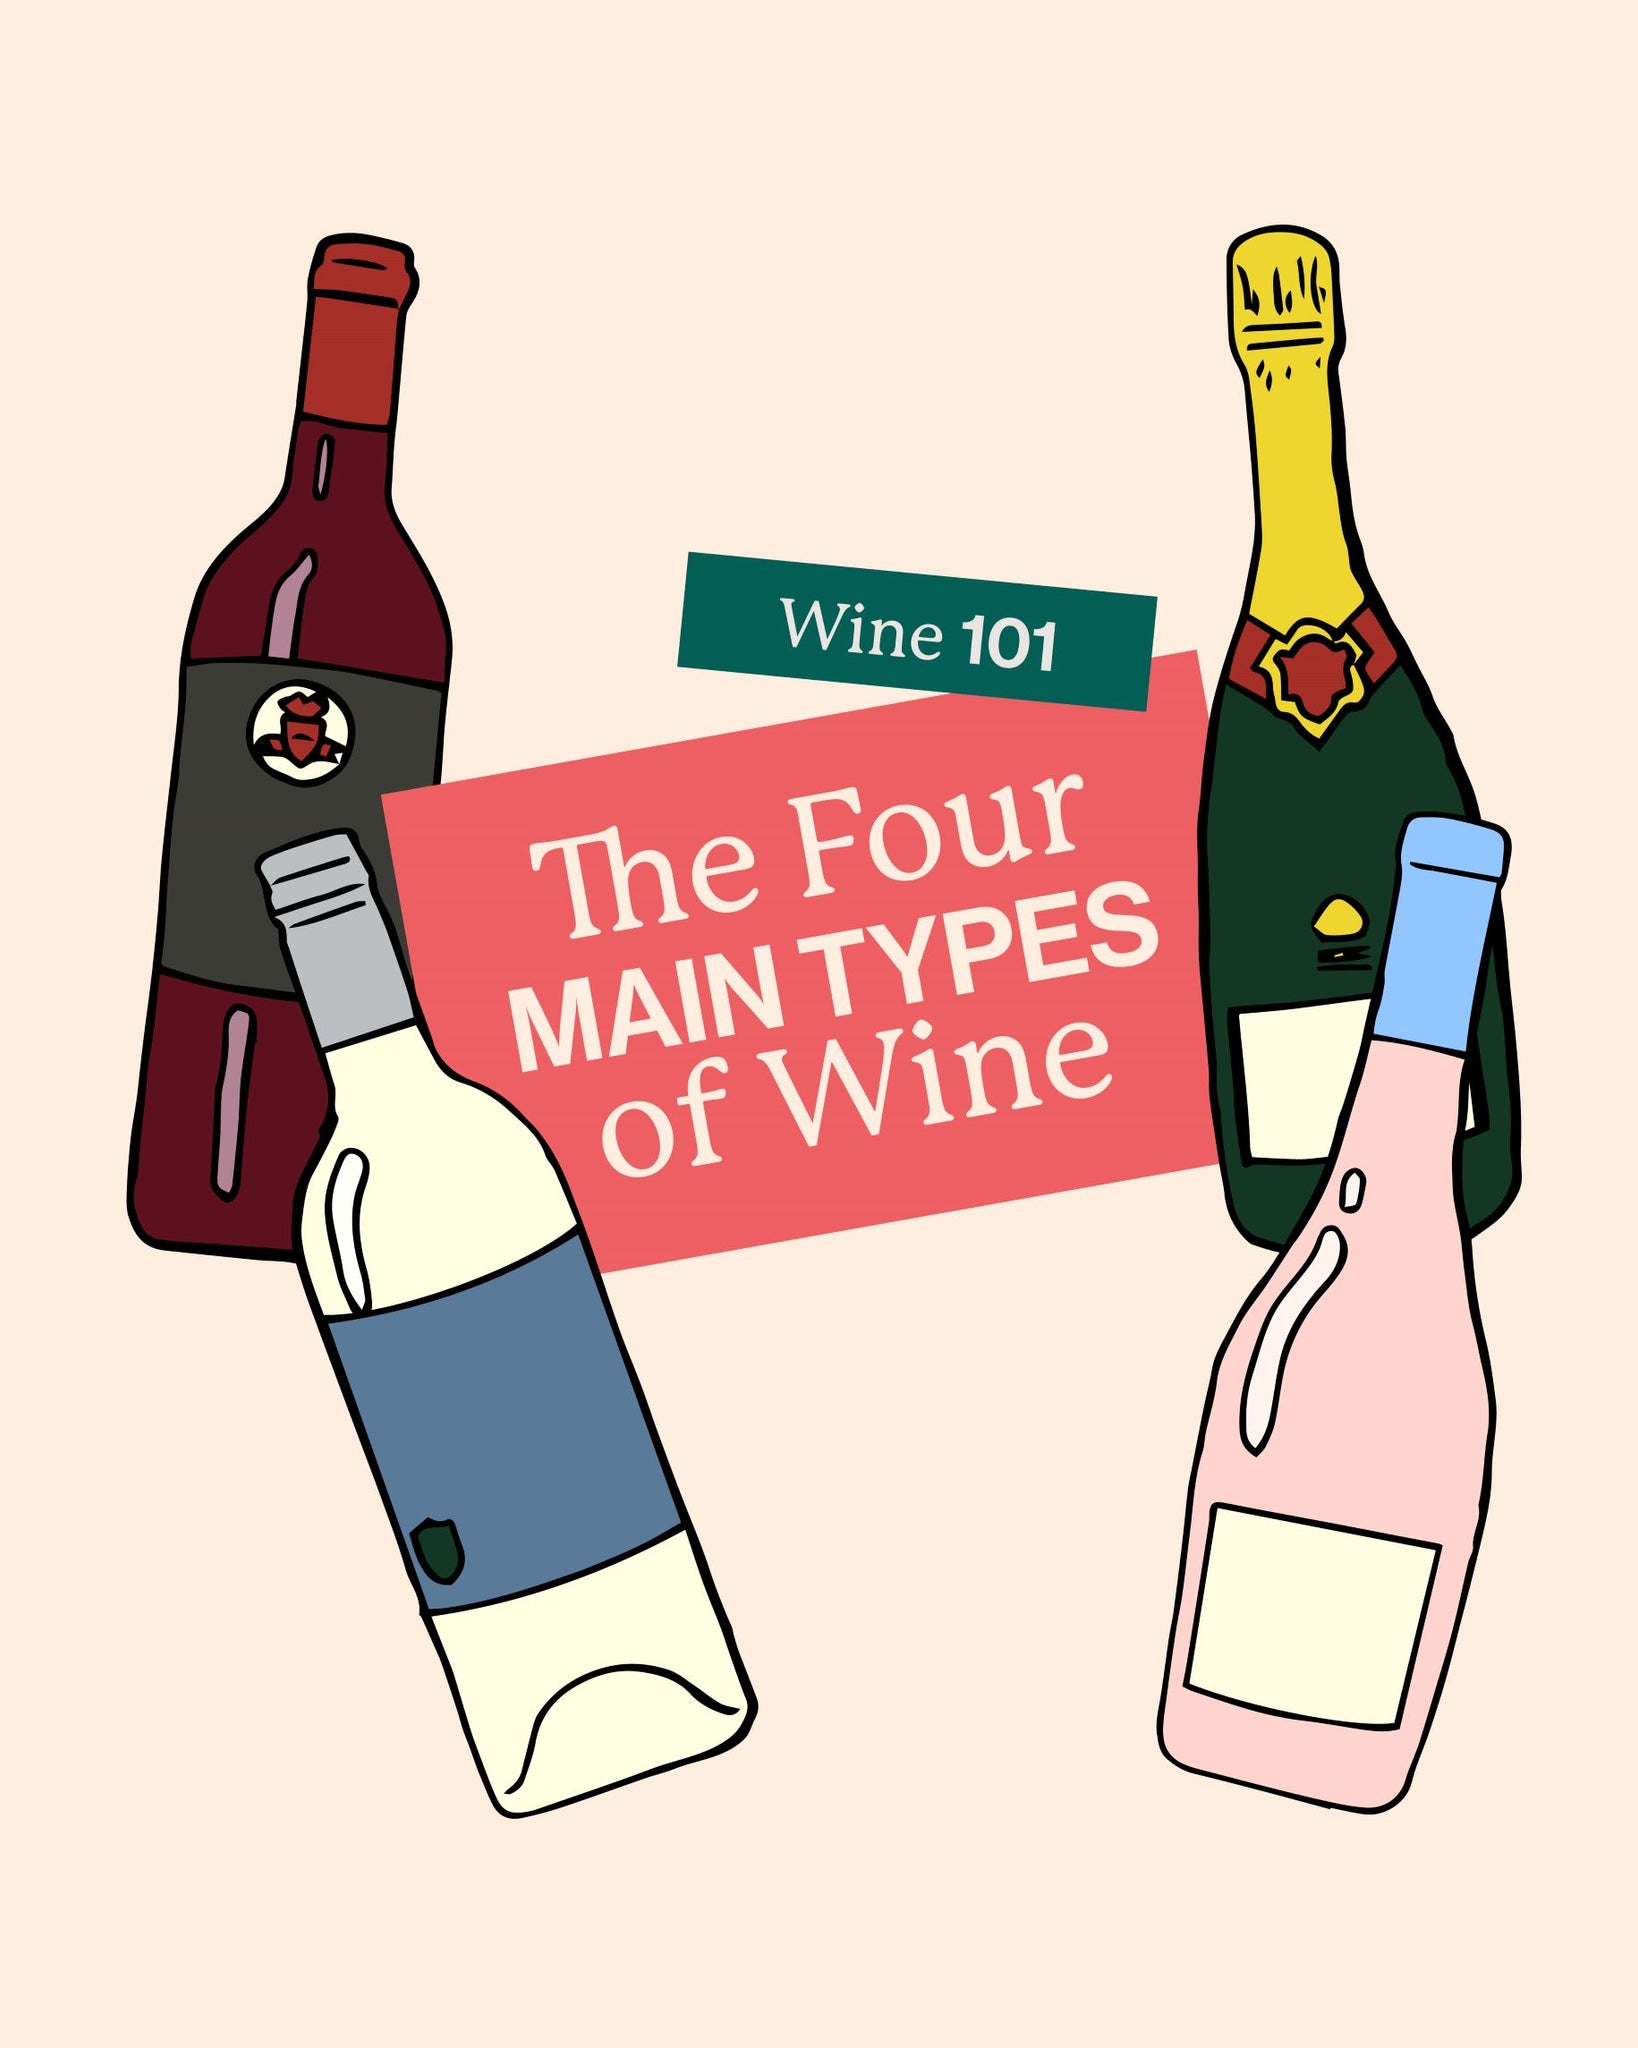 What are the four main types of wine?